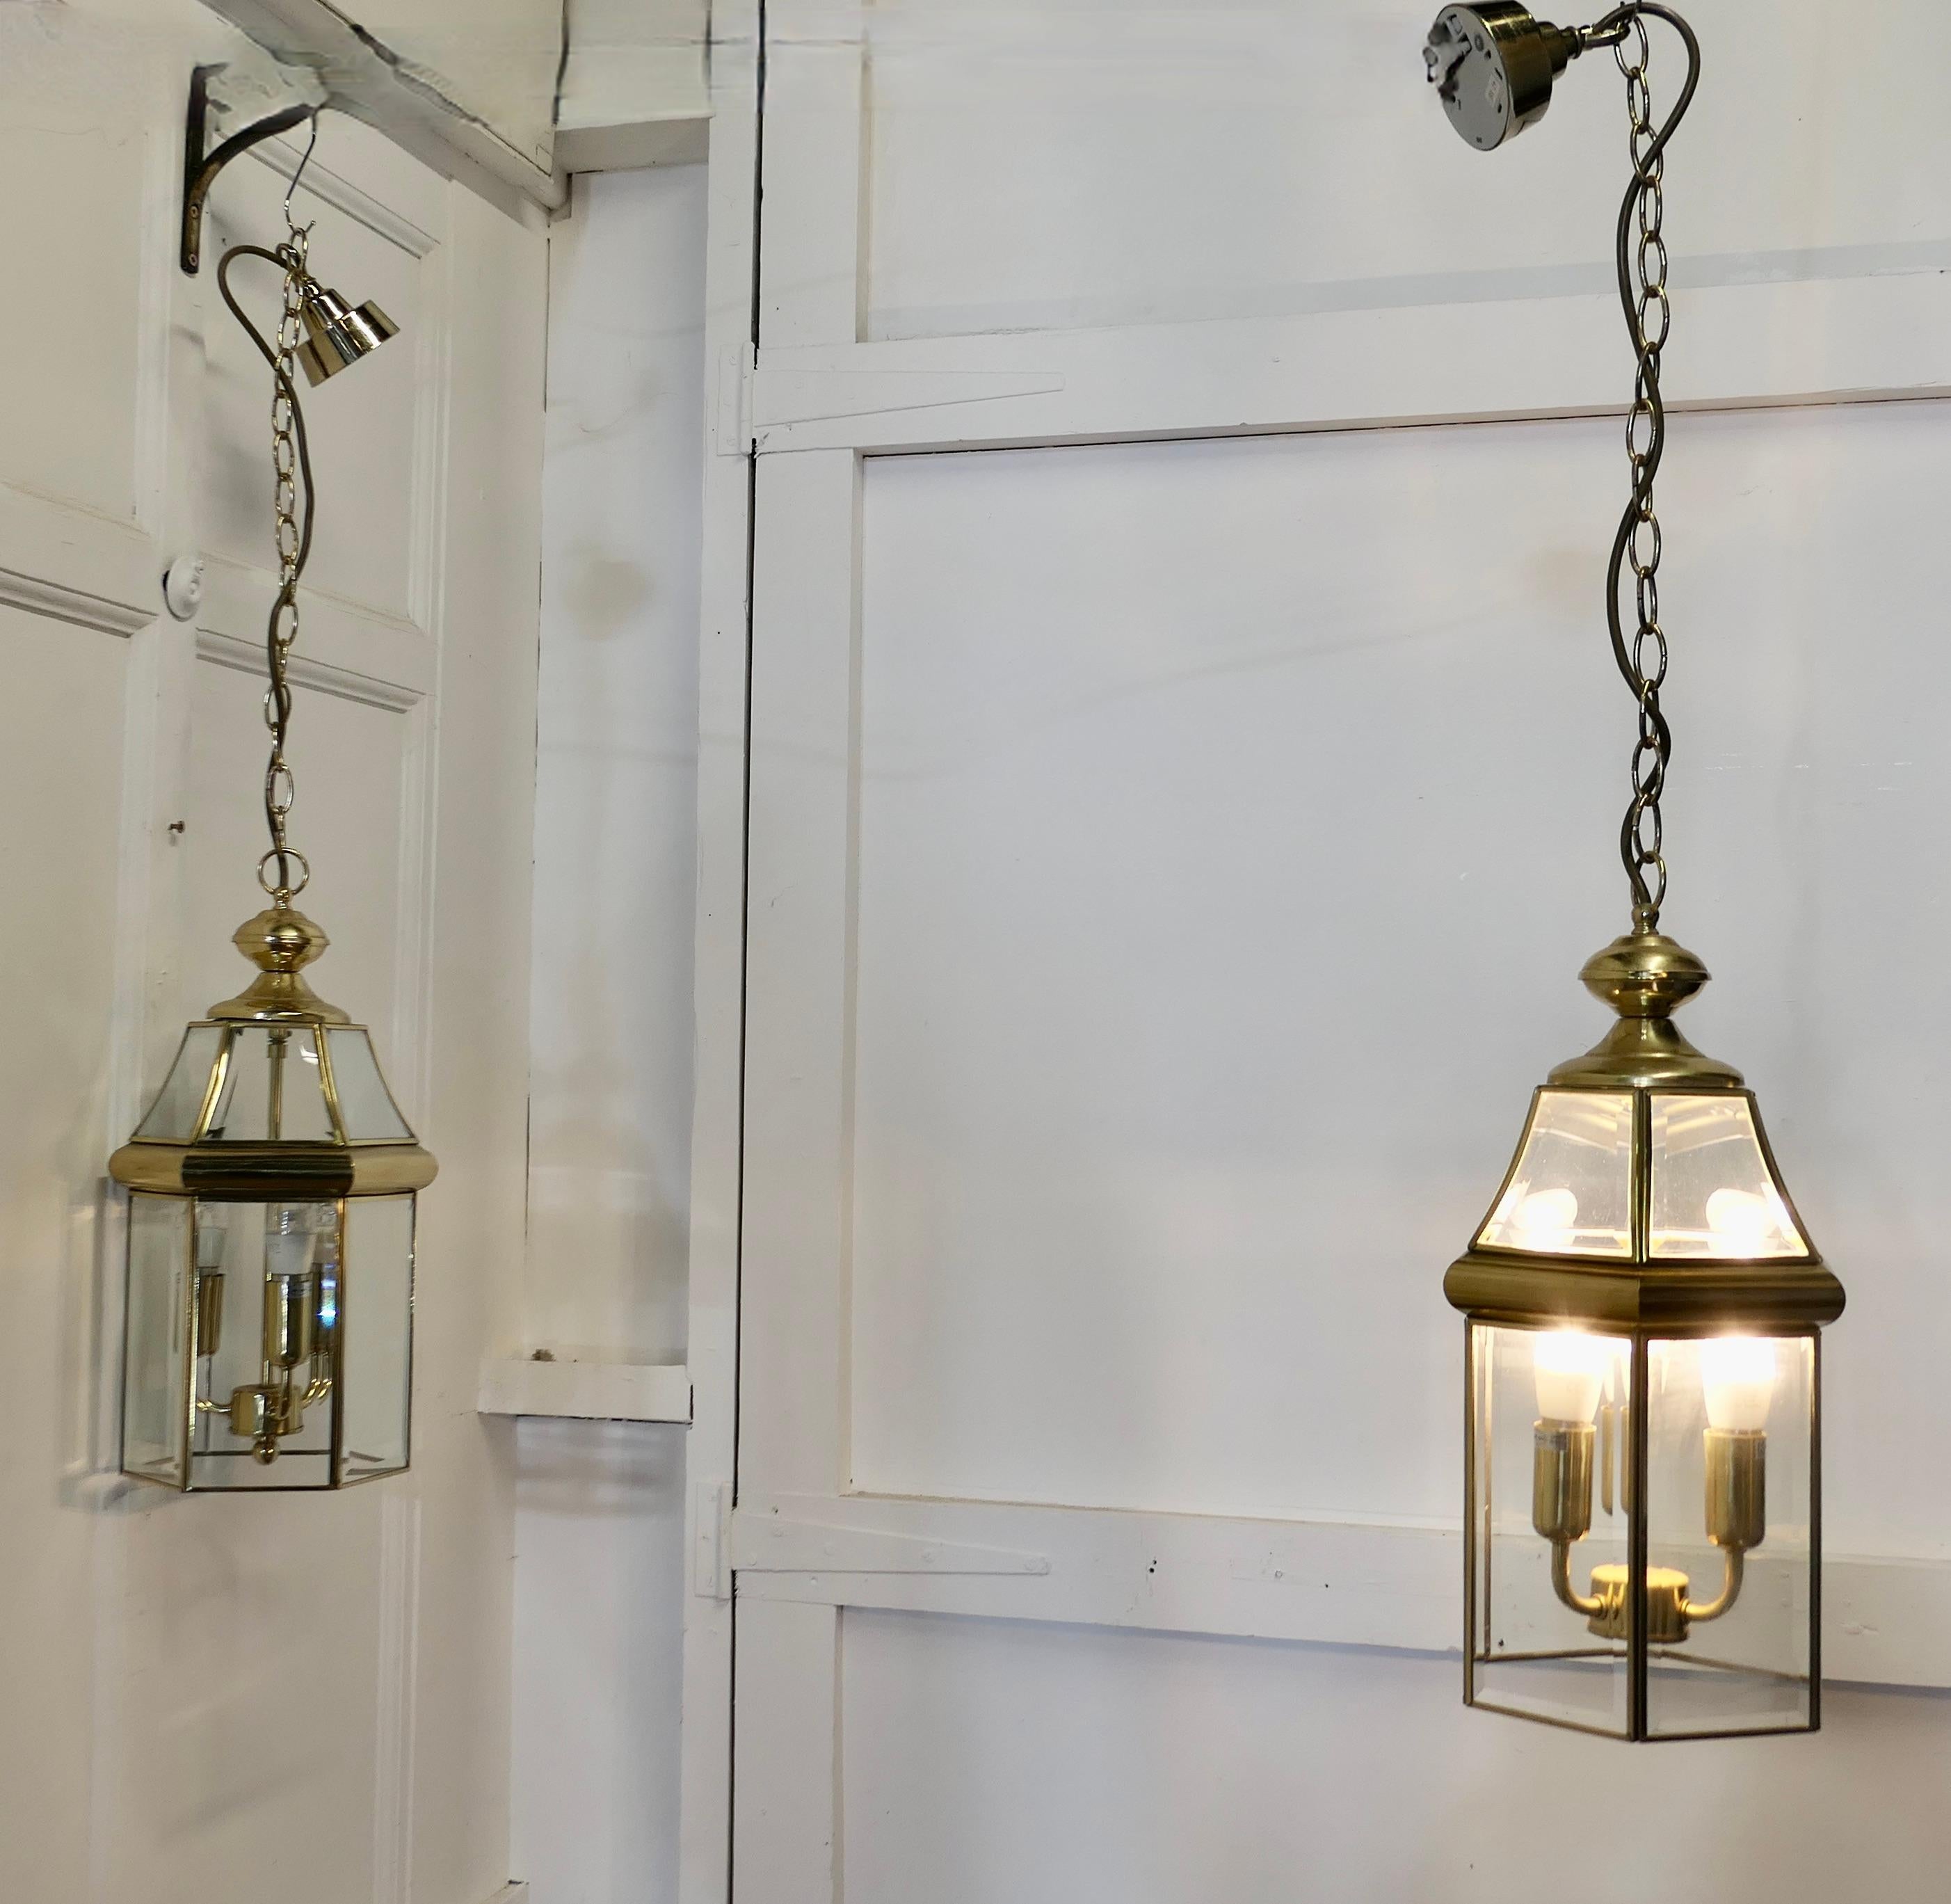 A Pair of  Art Deco Style Brass & Glass Hall Lanterns

A superb impressive pair of brass lanterns, these have 6 clear glass sides set with bevelled cut glass both  high and low with 3 bulb holders inside, they each hang on a brass chain and ceiling